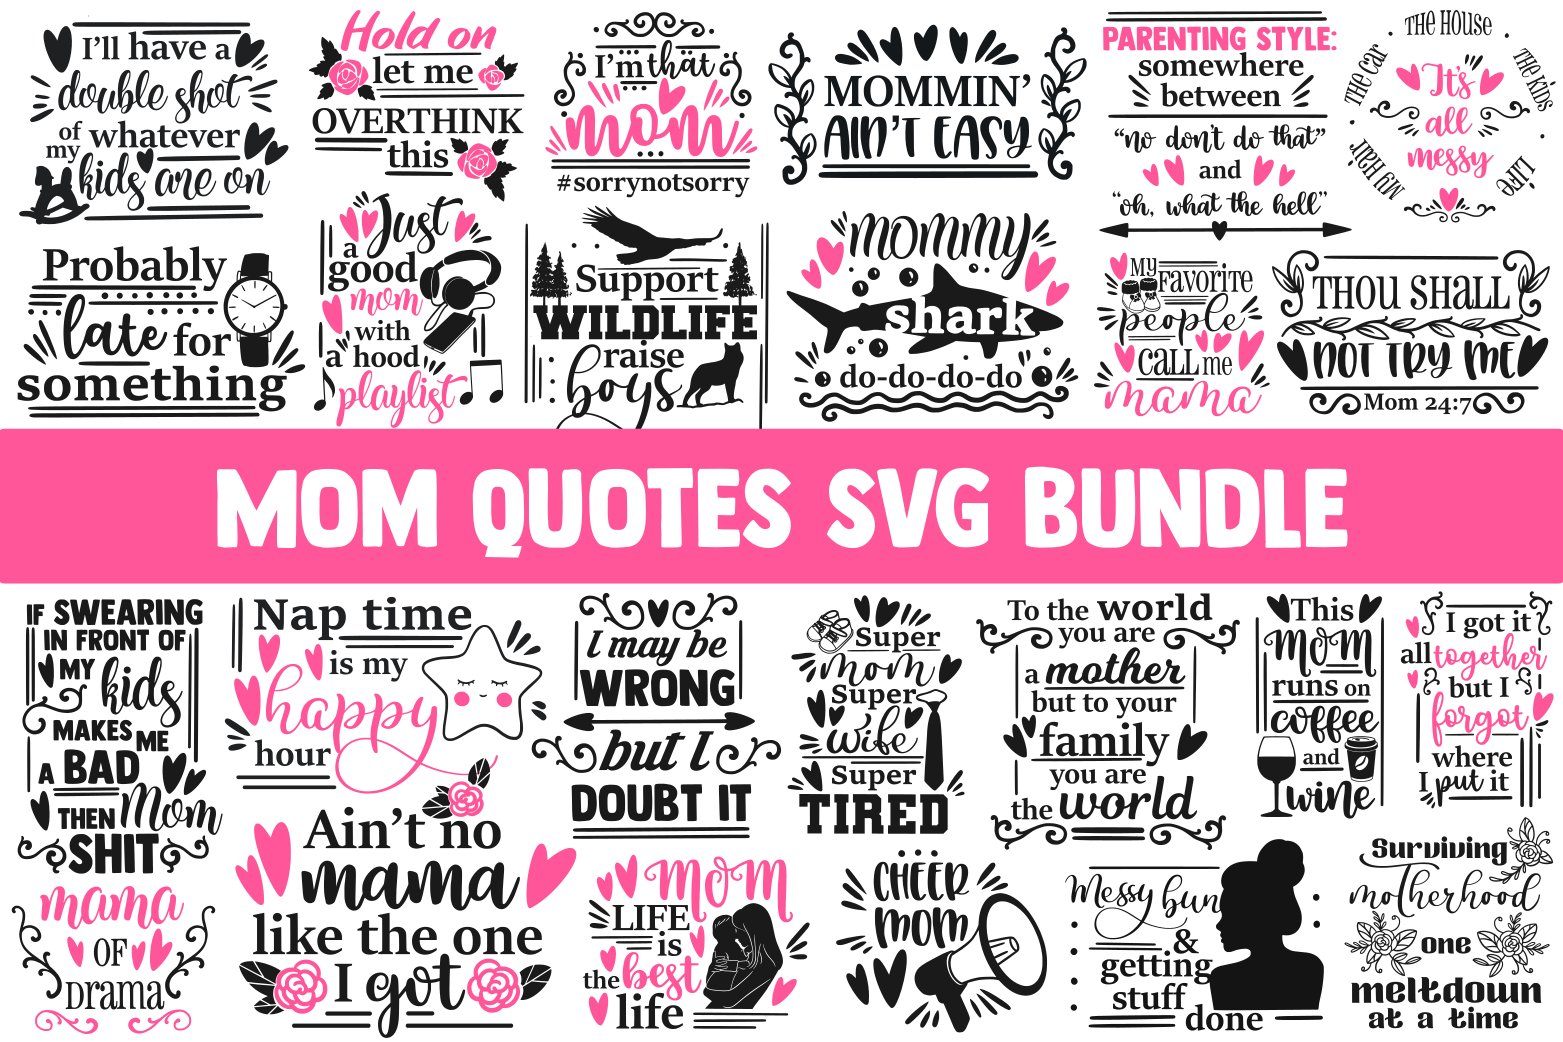 Bundle with quotes.